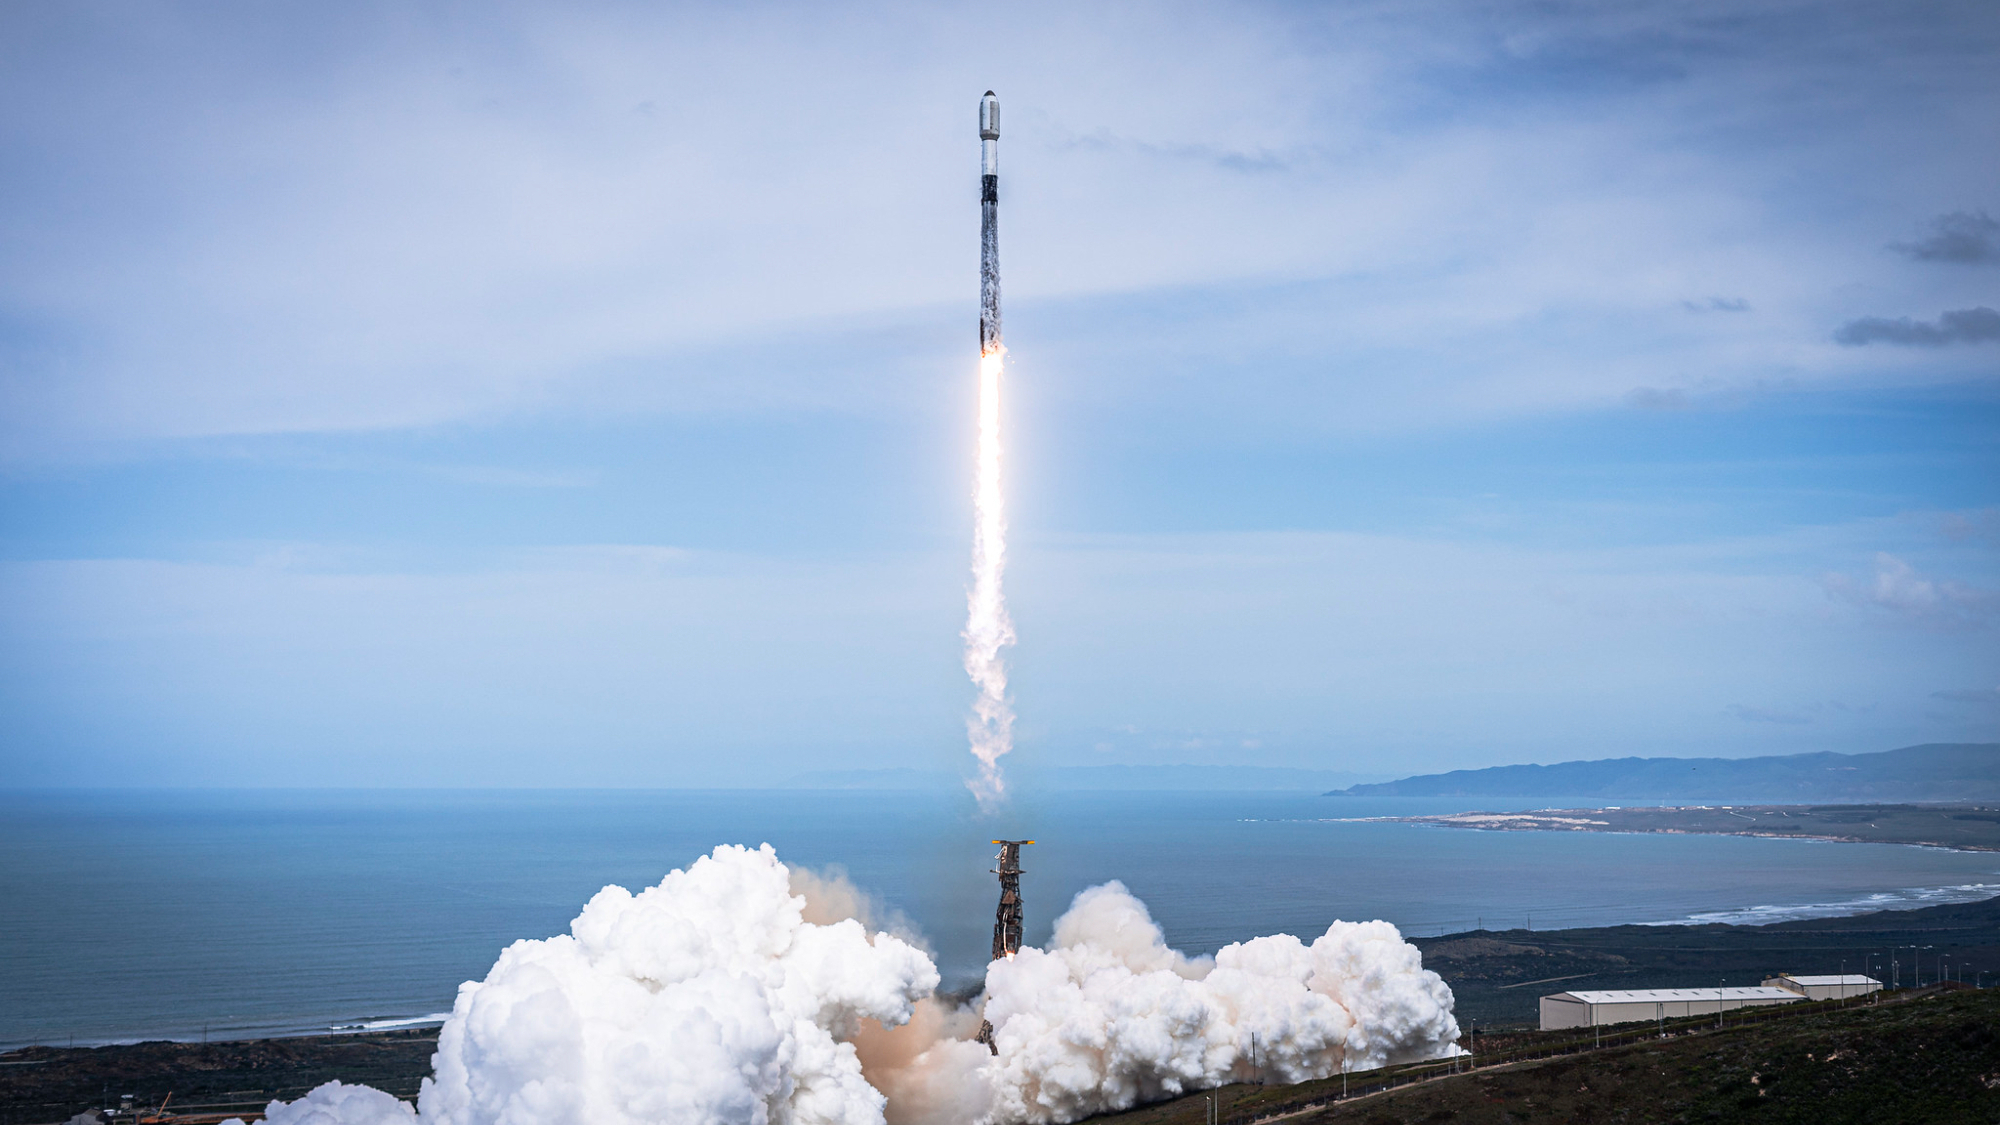 Spaceflight tripleheader! SpaceX planning 3 launches in 5-hour span today Space